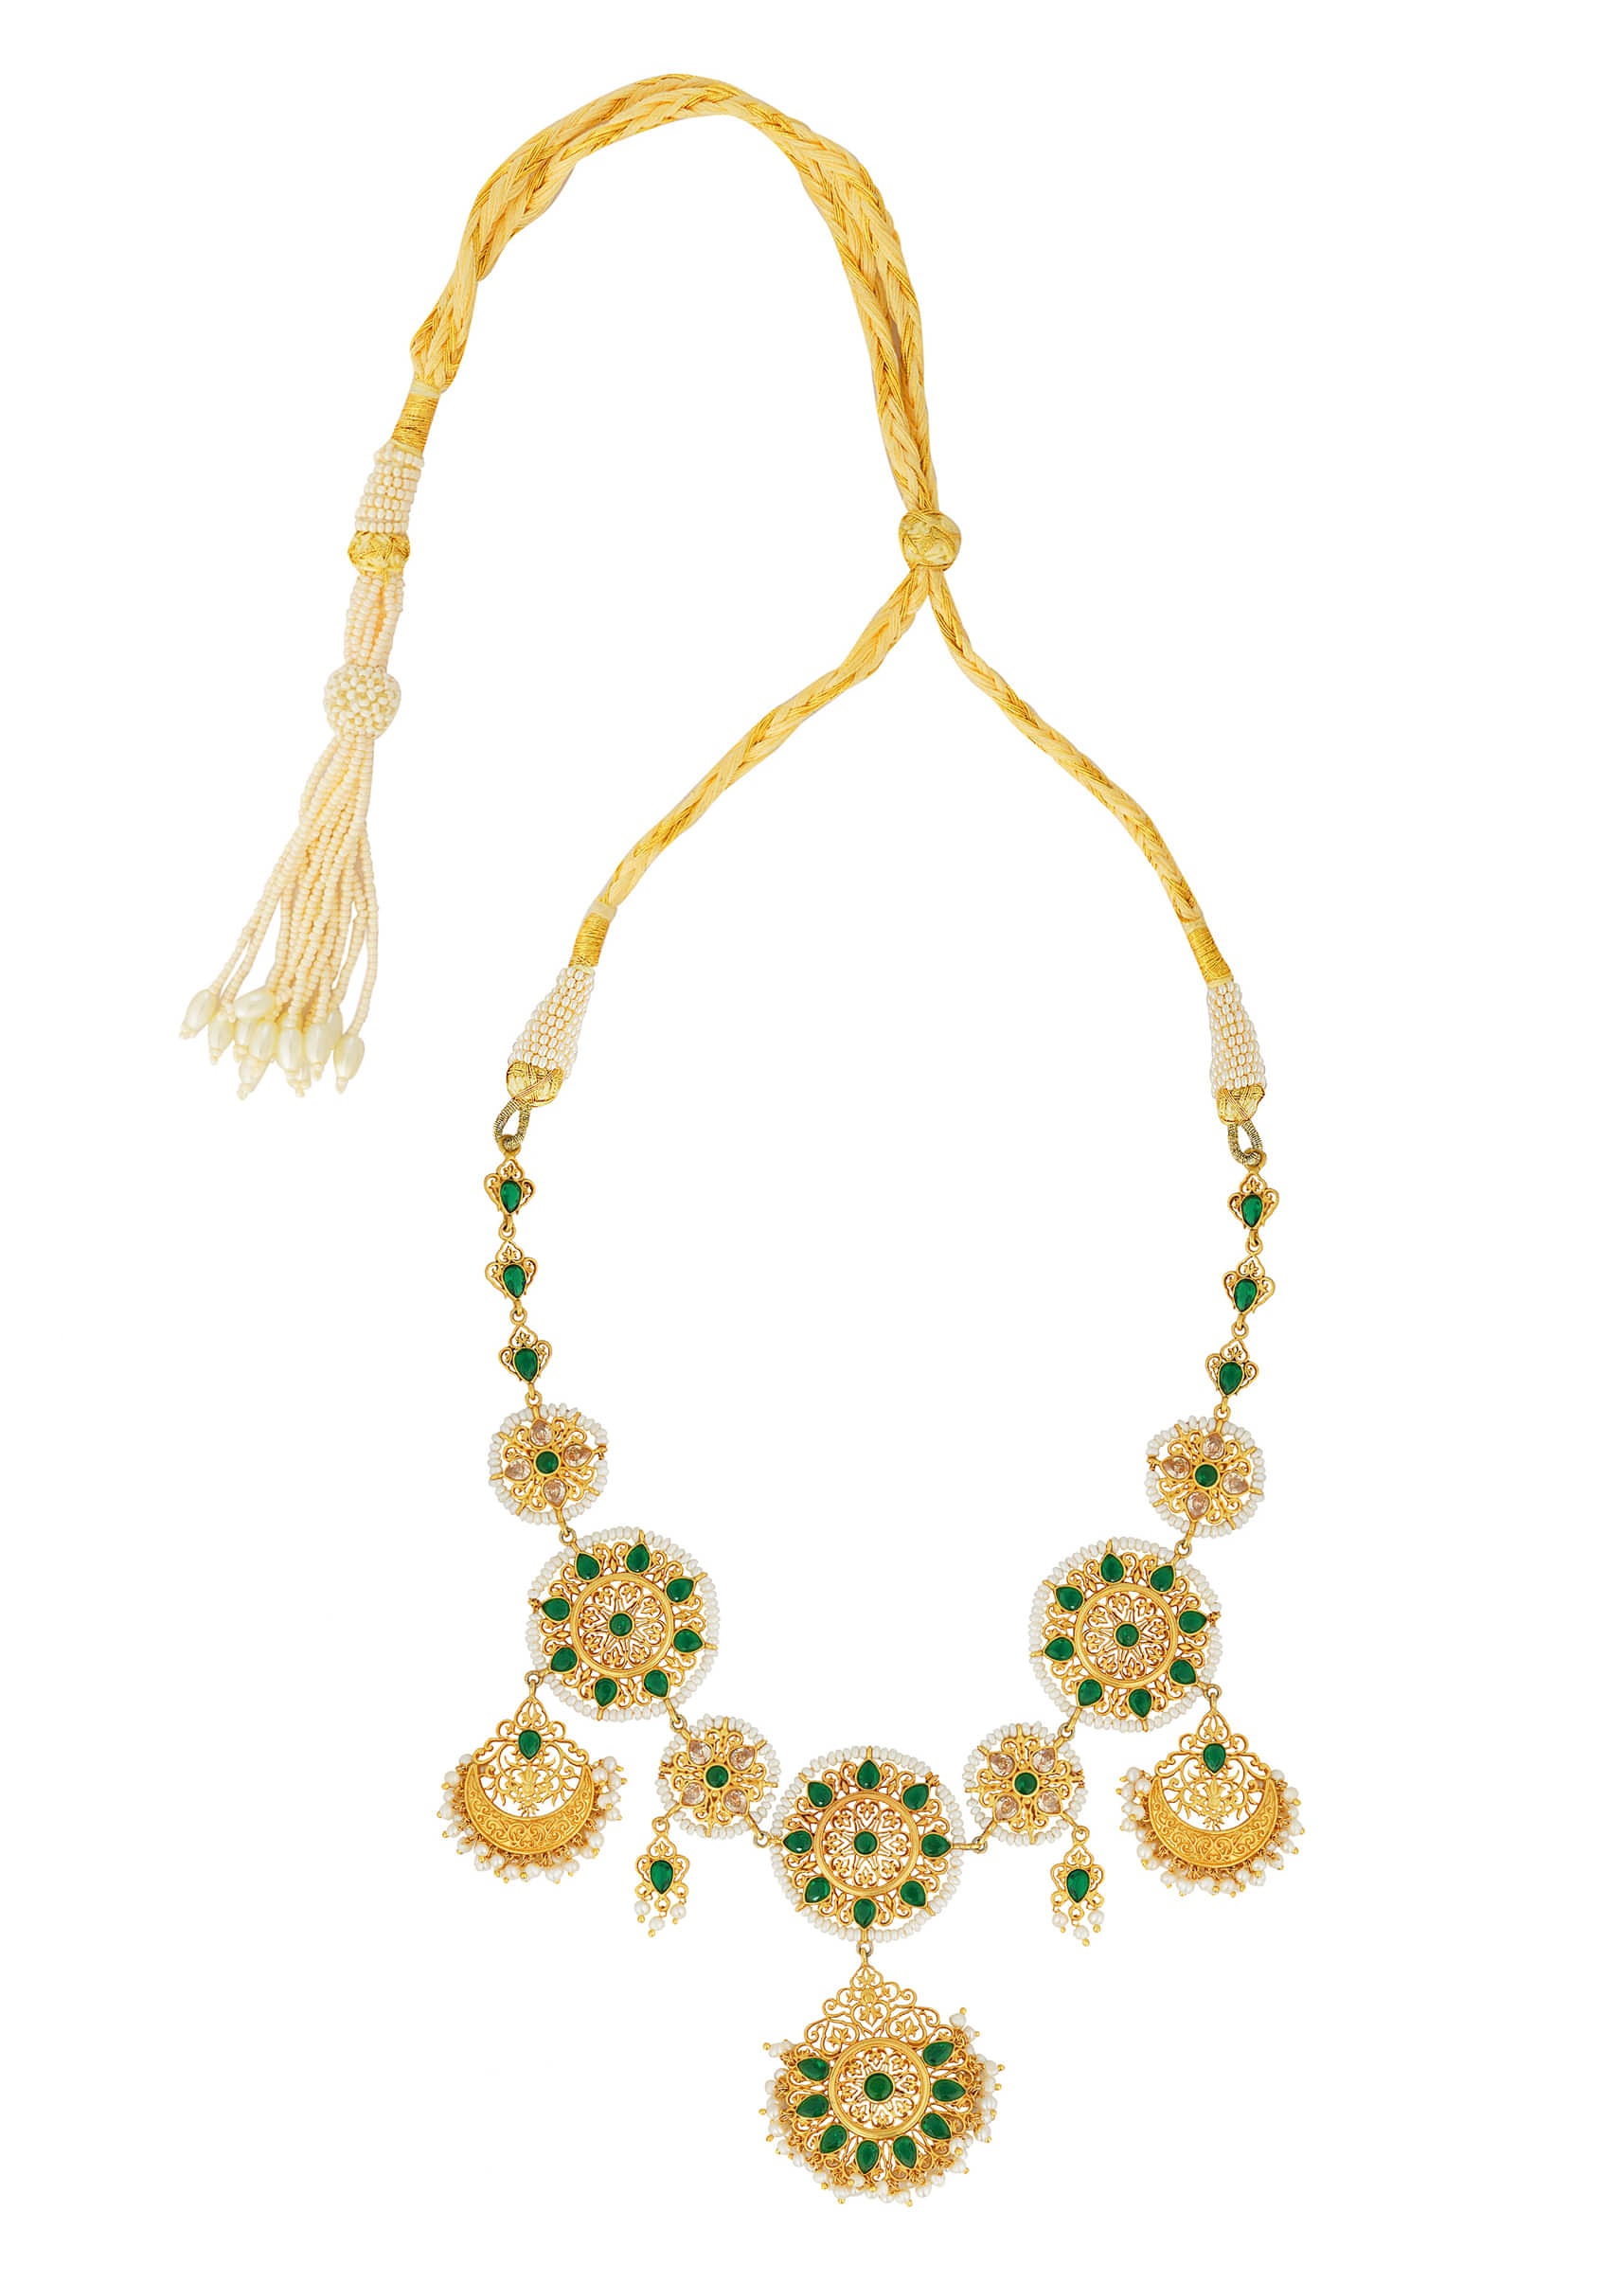 Green Cz Necklace In Floral Mughal Design With Pearls By Zariin